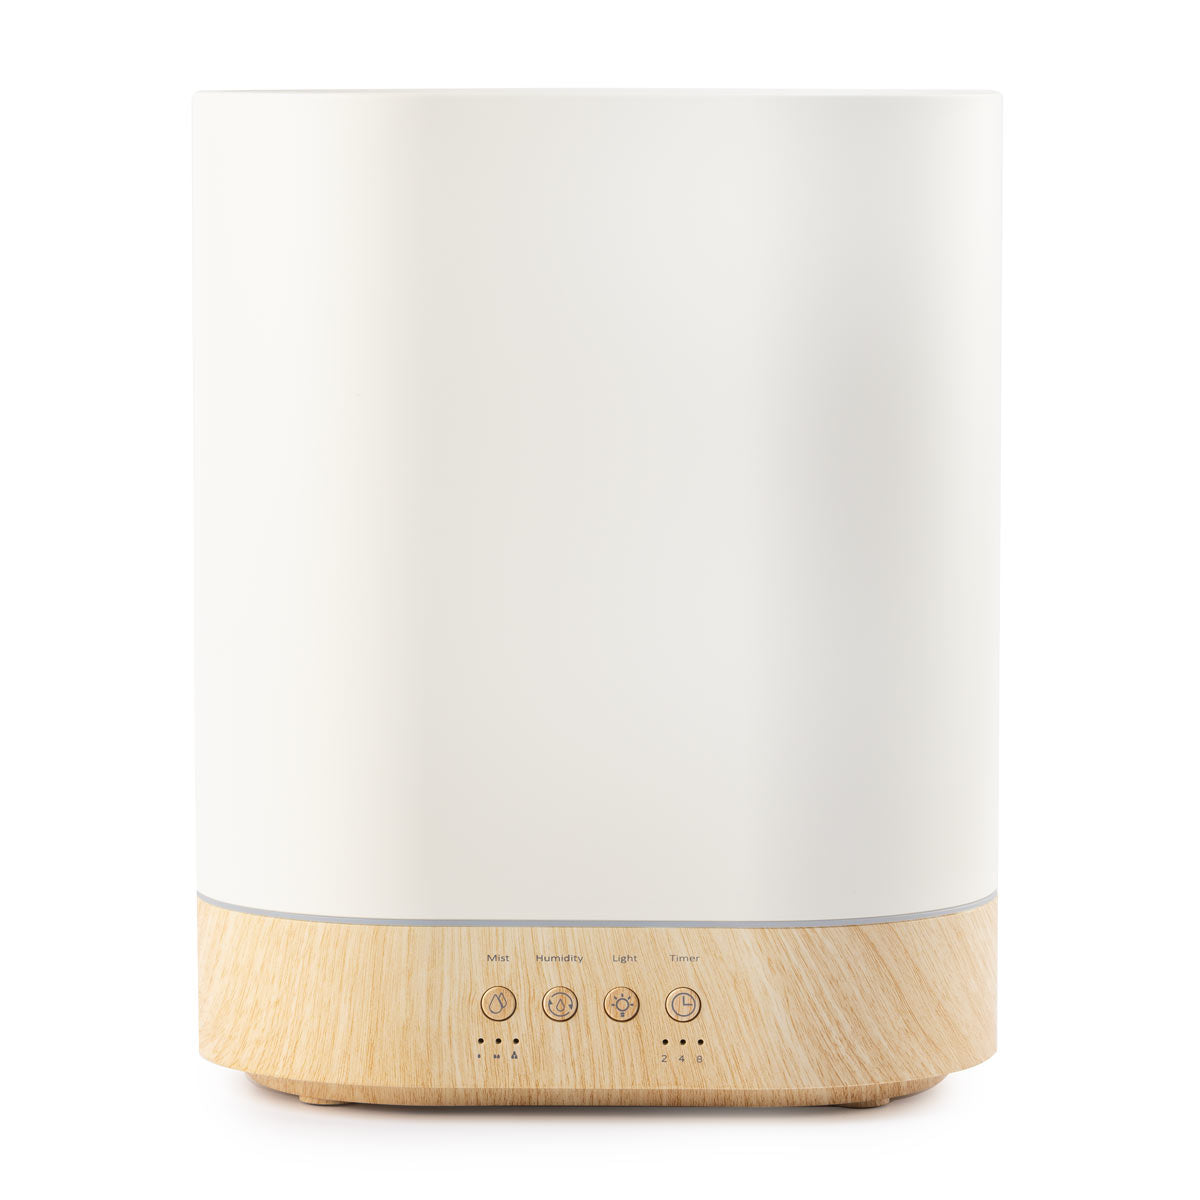 Aroma-Haven 1.8ltr Humidifier Diffuser